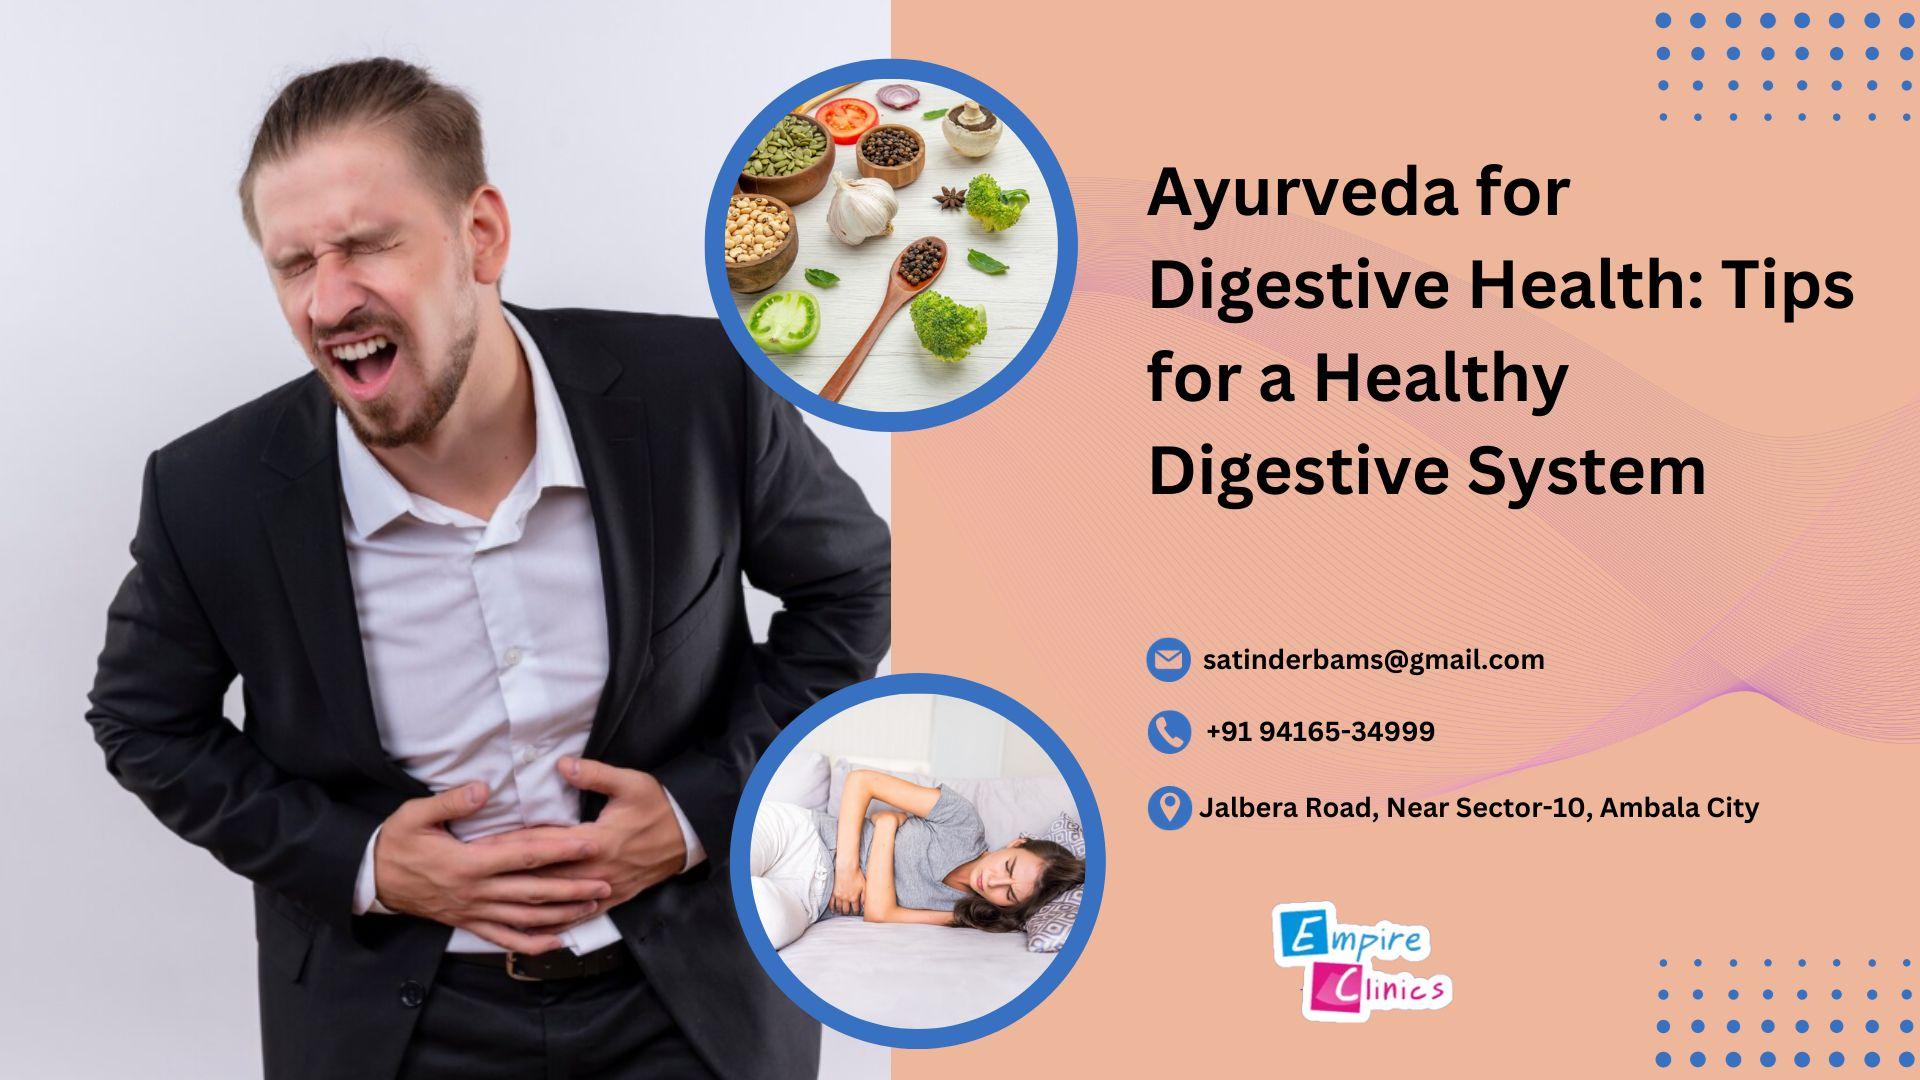 ayurveda-for-digestive-health-tips-for-a-healthy-digestive-system